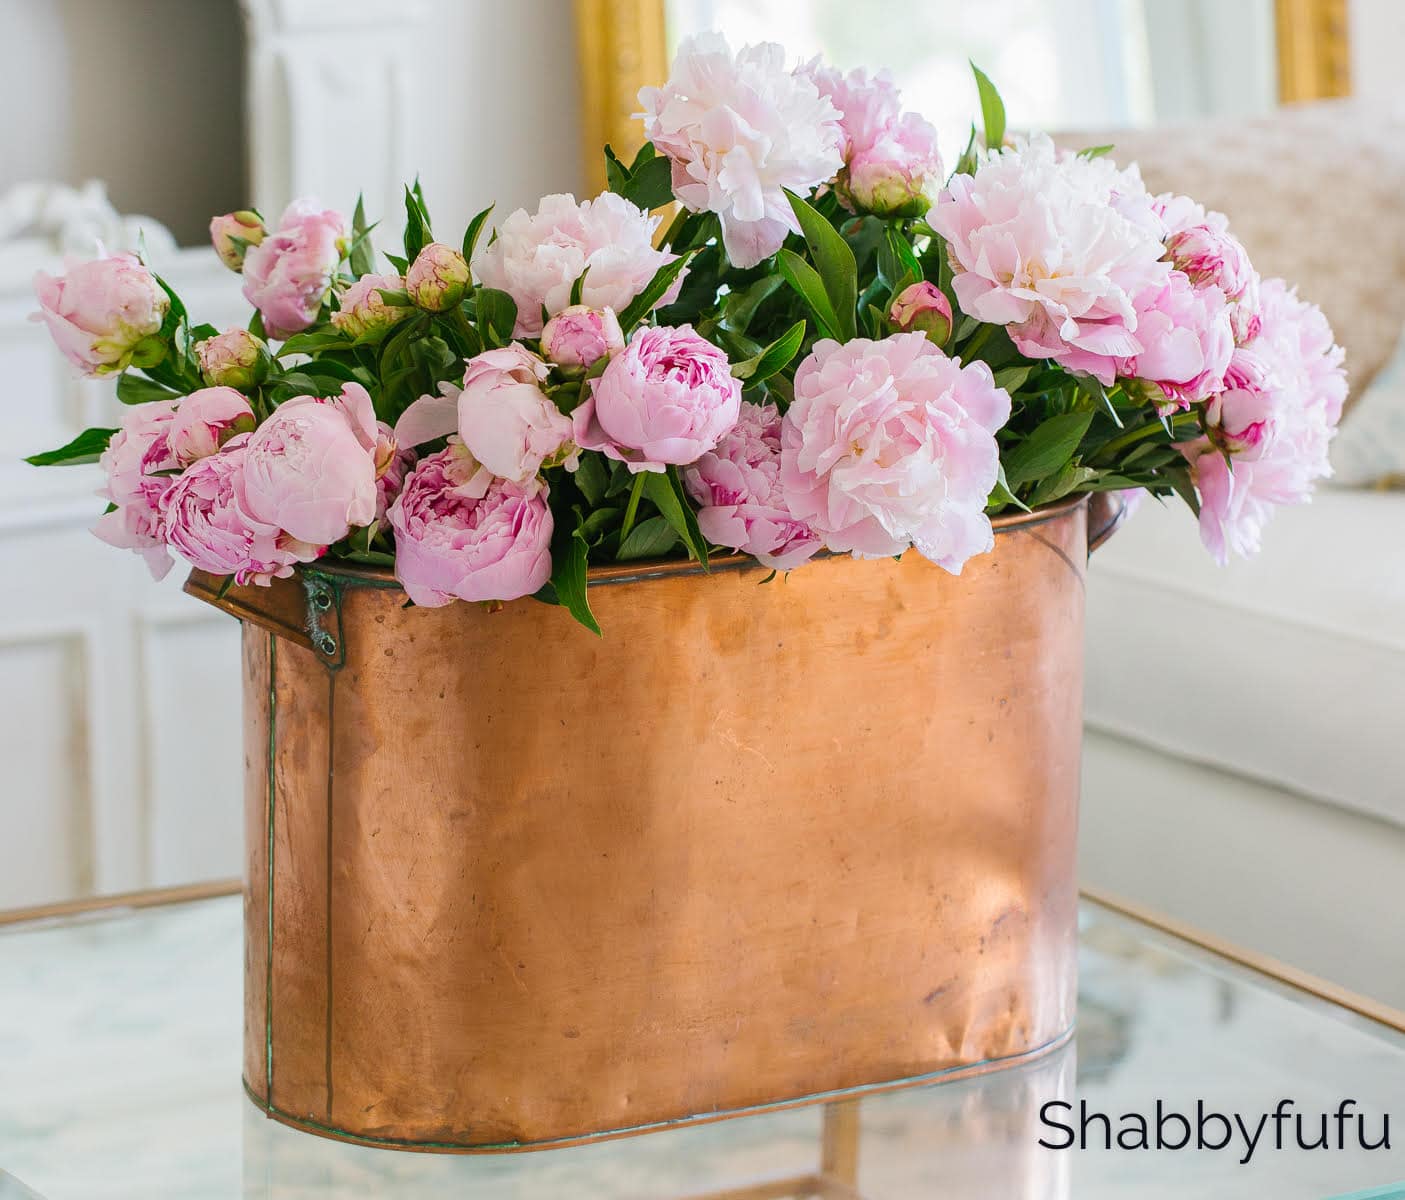 Example of how to clean tarnish from copper featuring a copper flower vase with pink peonies against a classy neutral living room